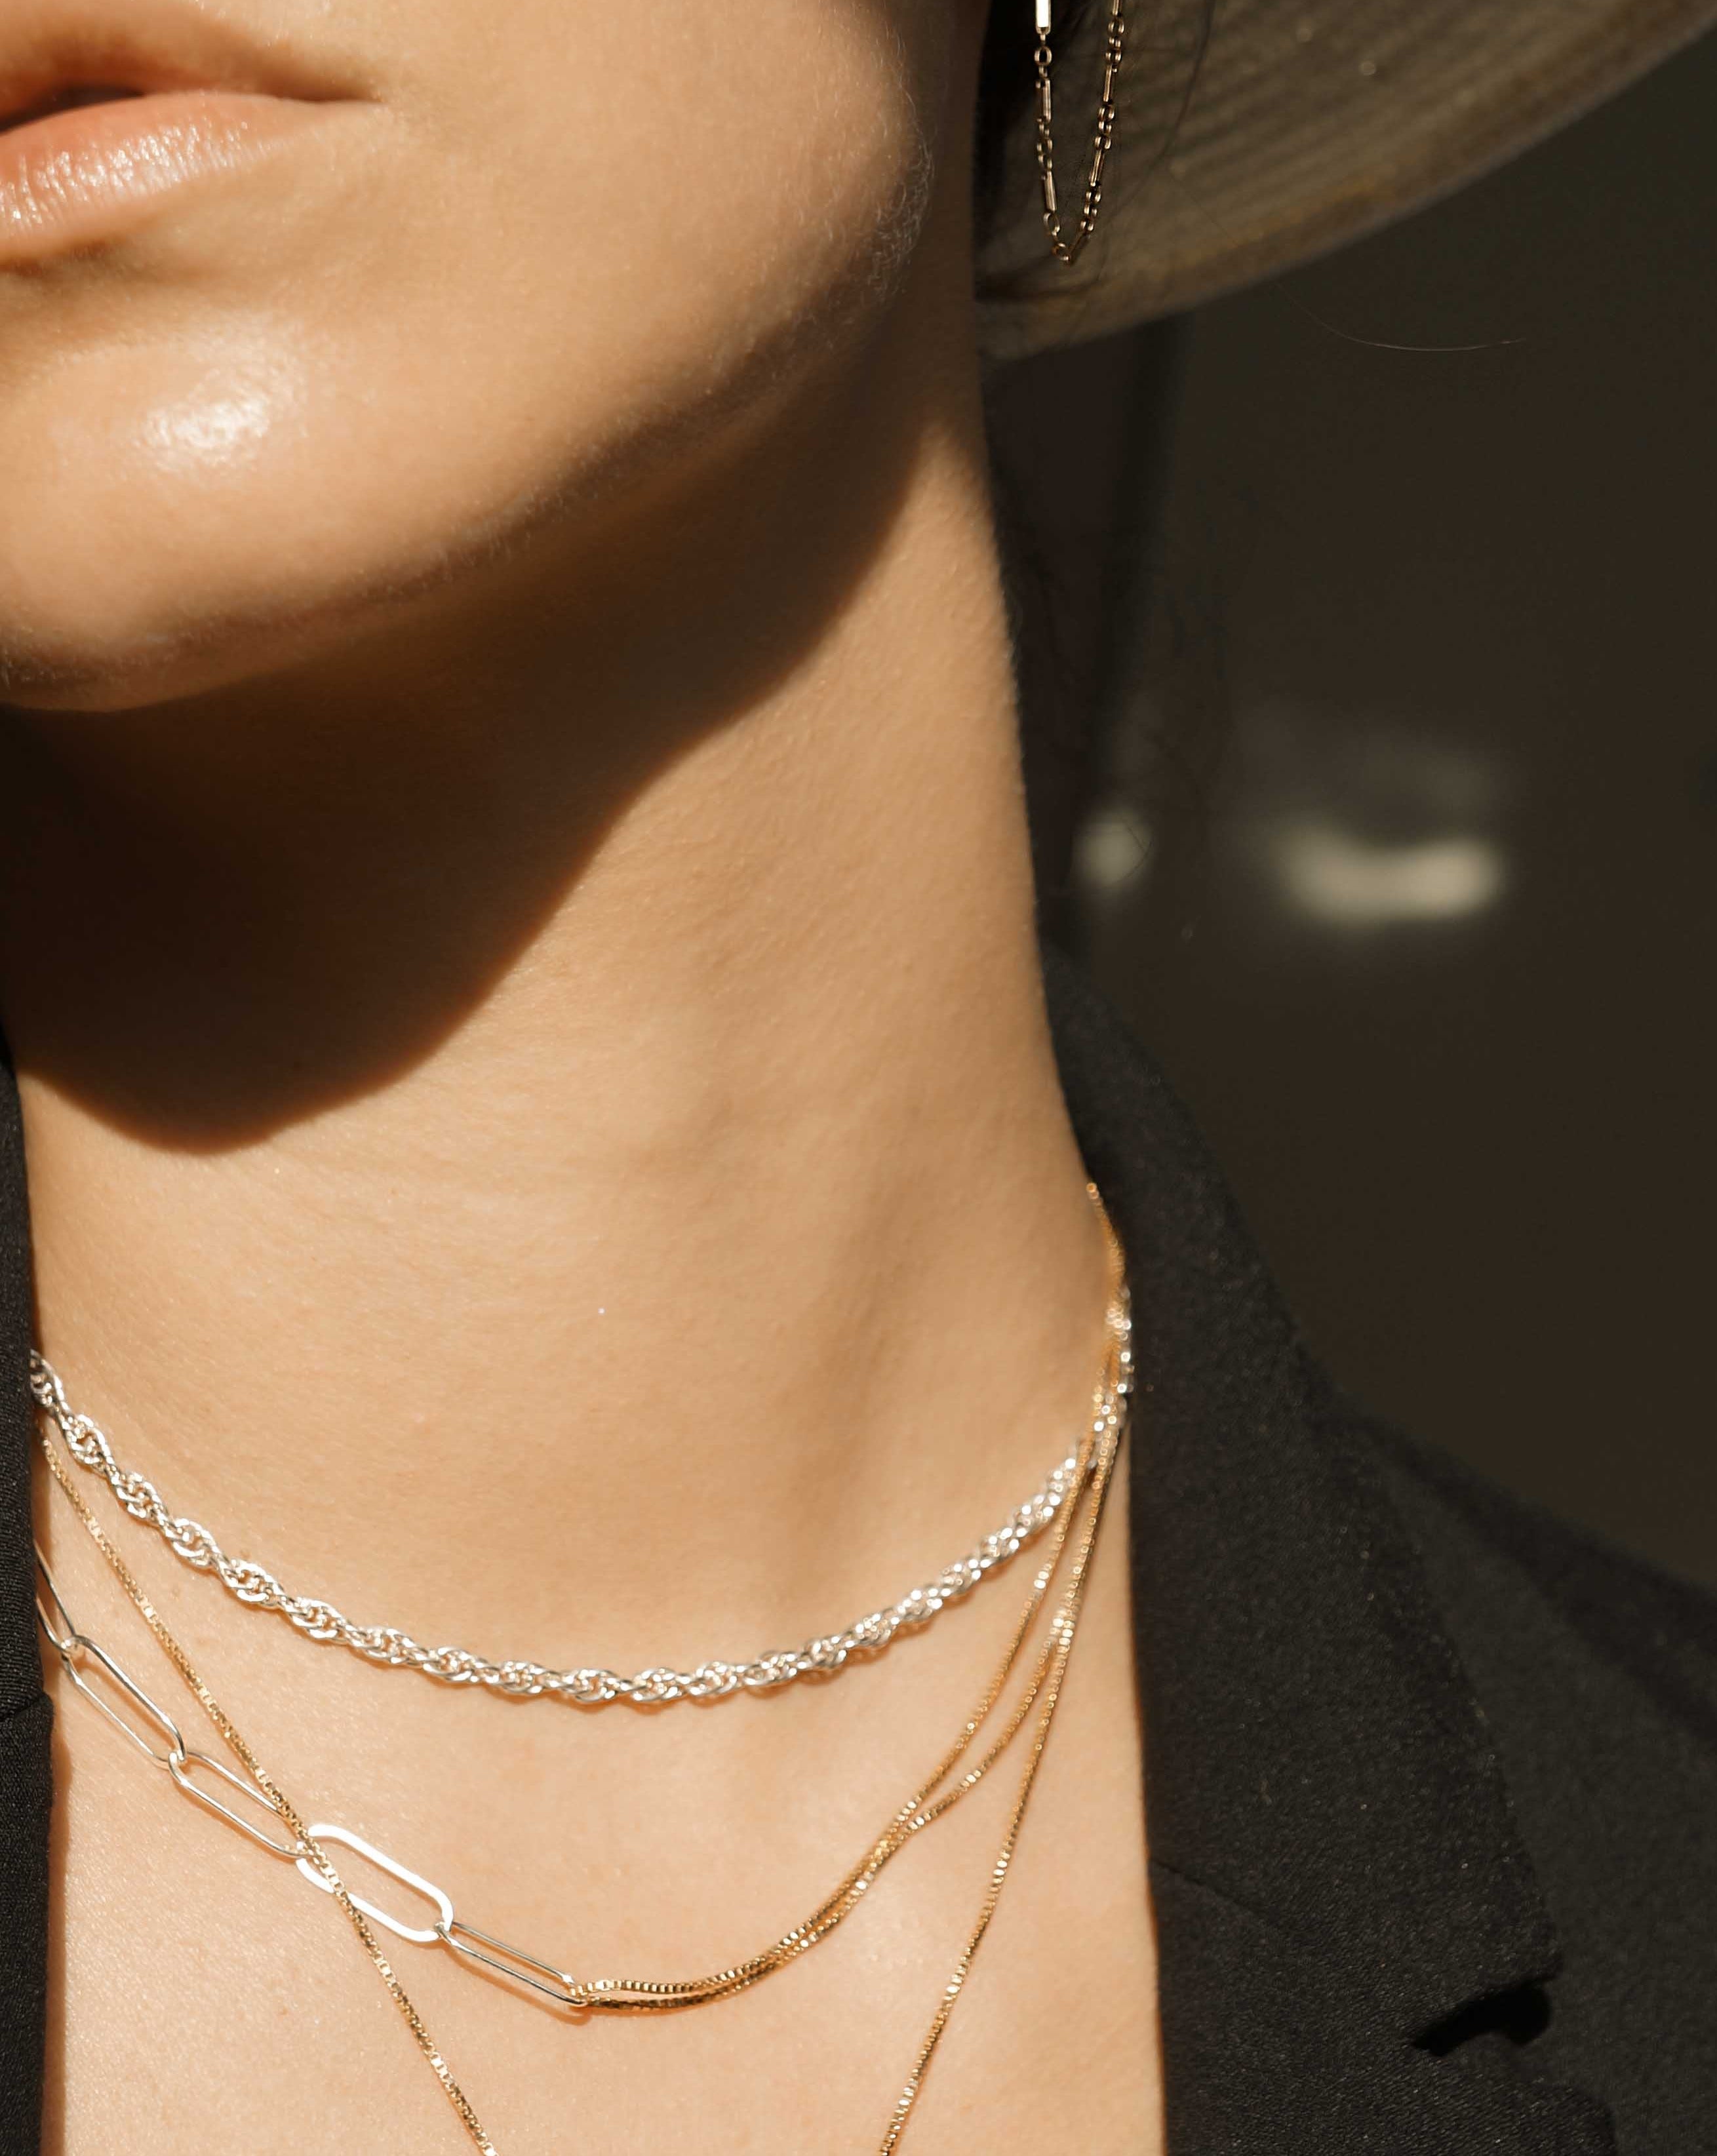 Isabella Necklace by KOZAKH. A 14 to 16 inch adjustable length combo chain necklace with gold box chain and silver paperclip chain. The Flat Link Chain is in Sterling Silver chain and the 1mm Box chain is in 14k Gold Filled.